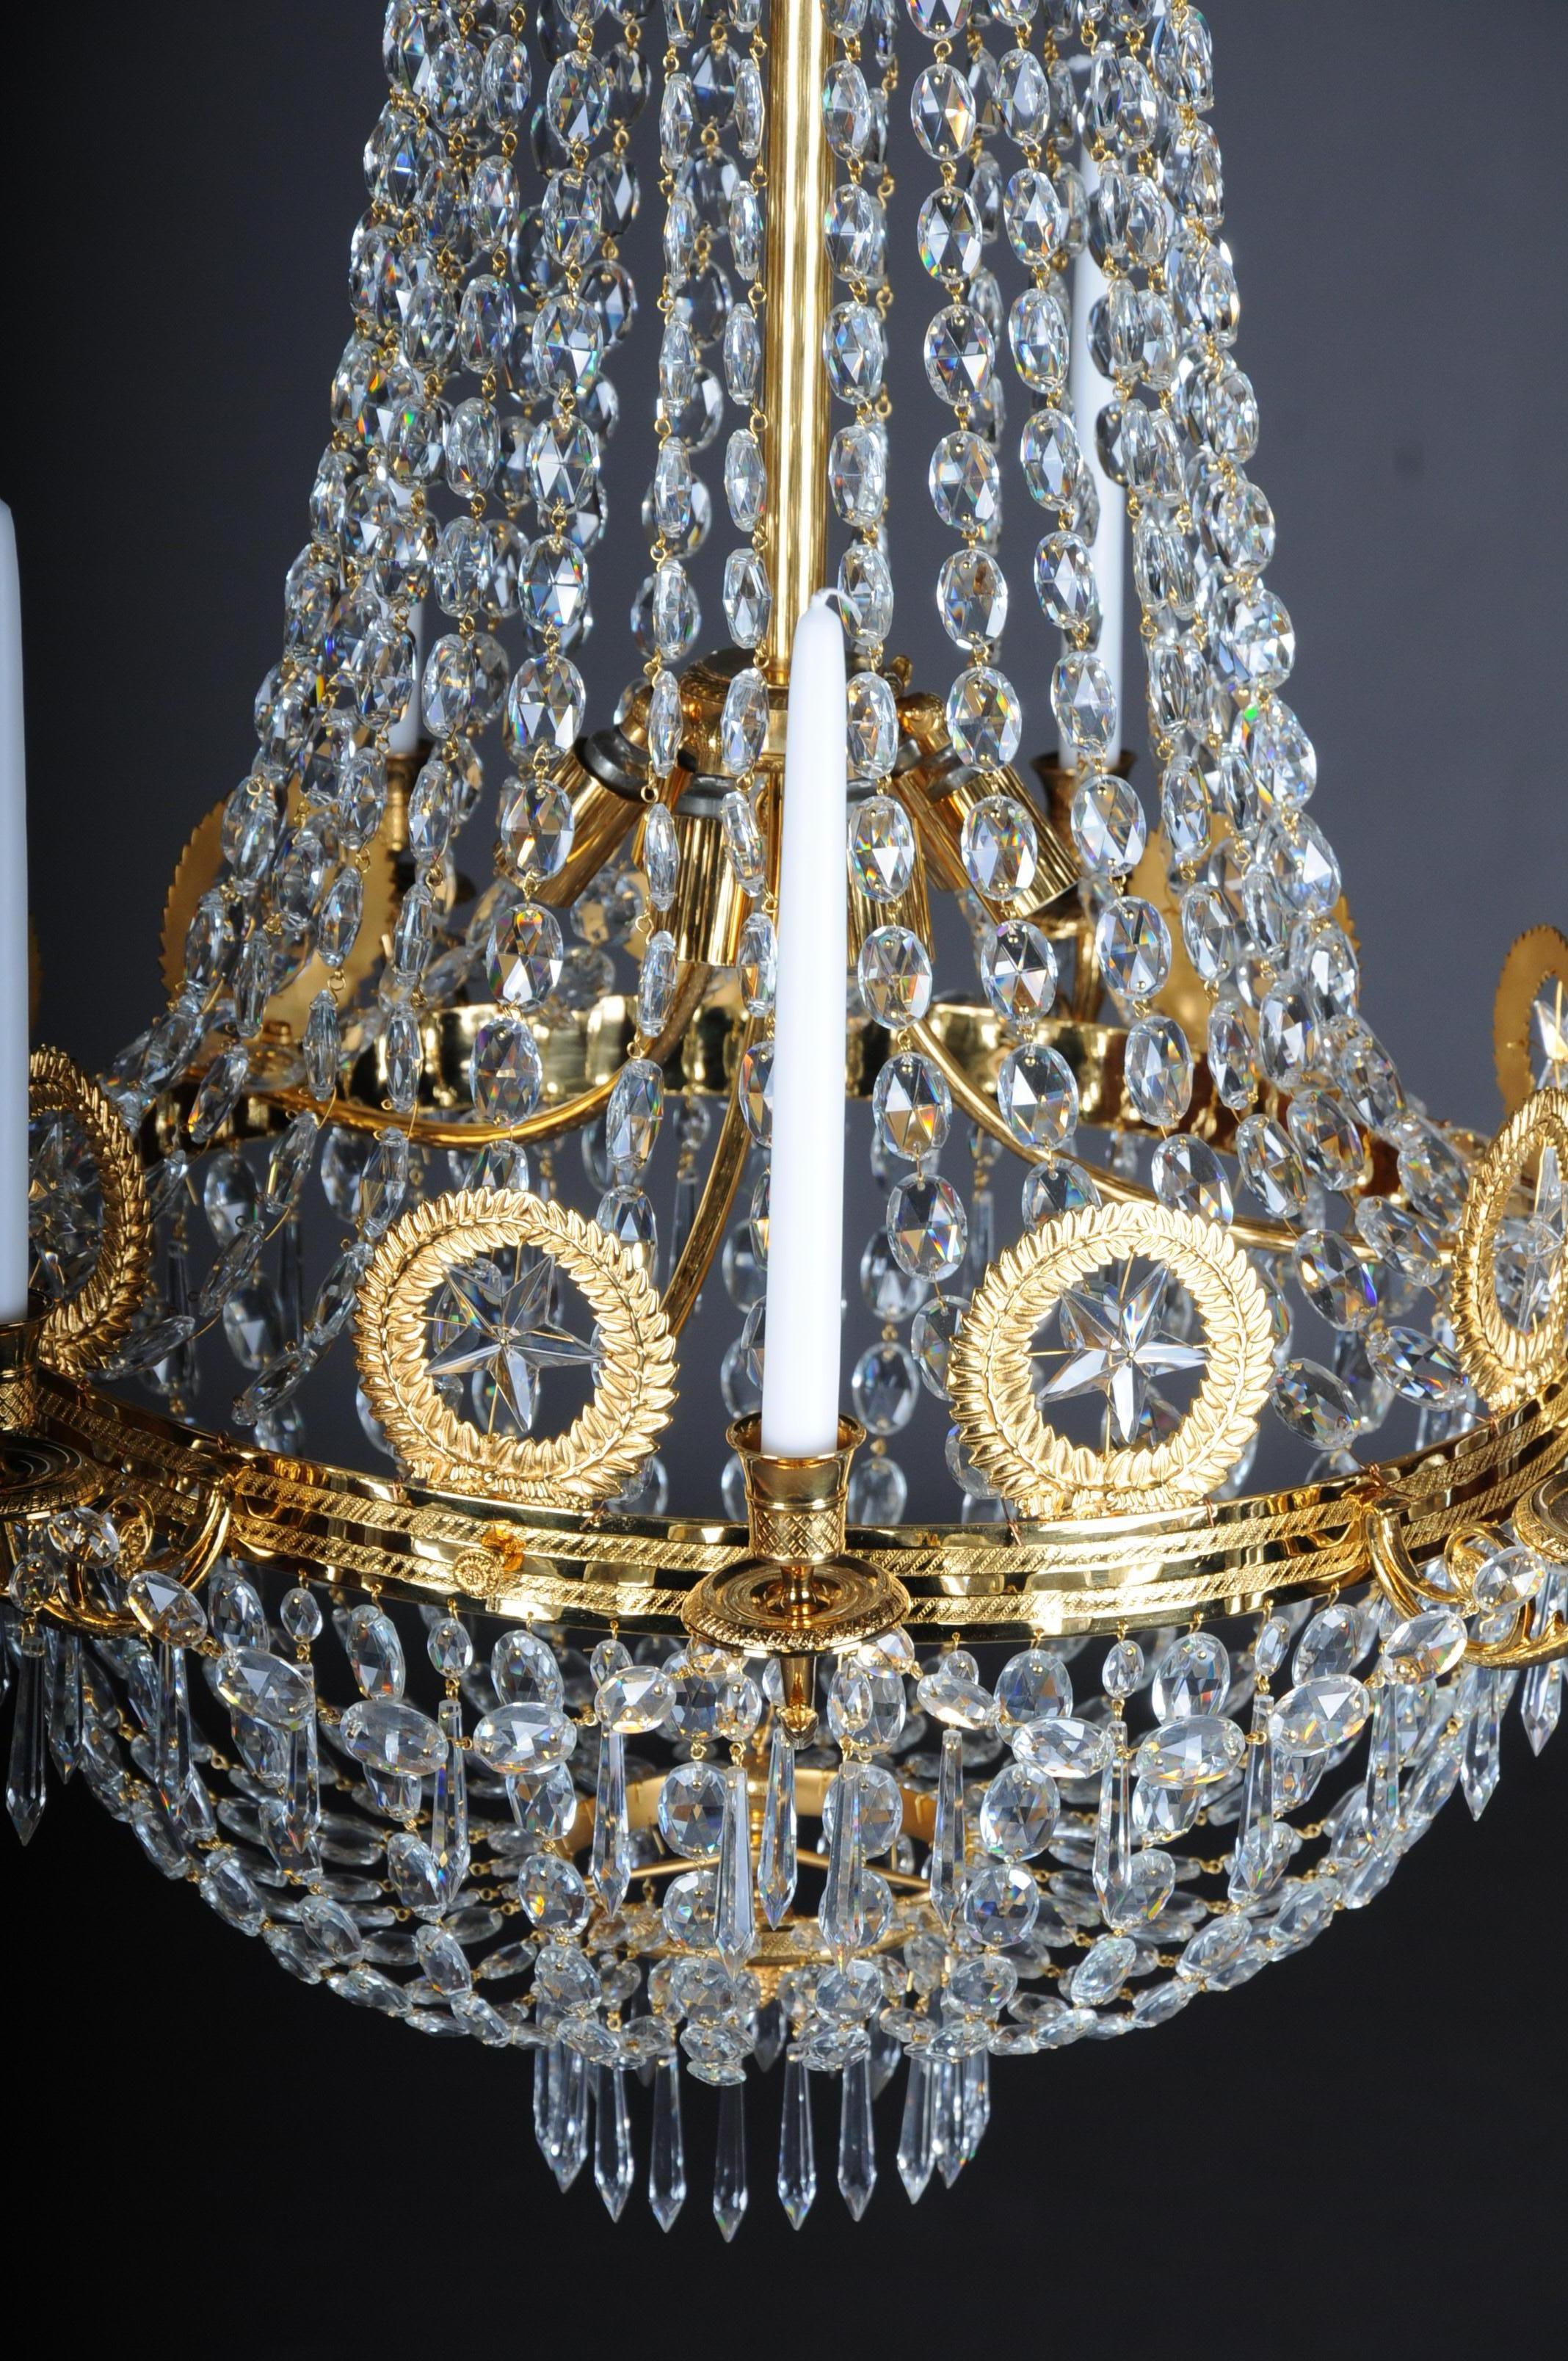 French Empire Crystal Chandelier, Charles X, High-Gloss Gilding